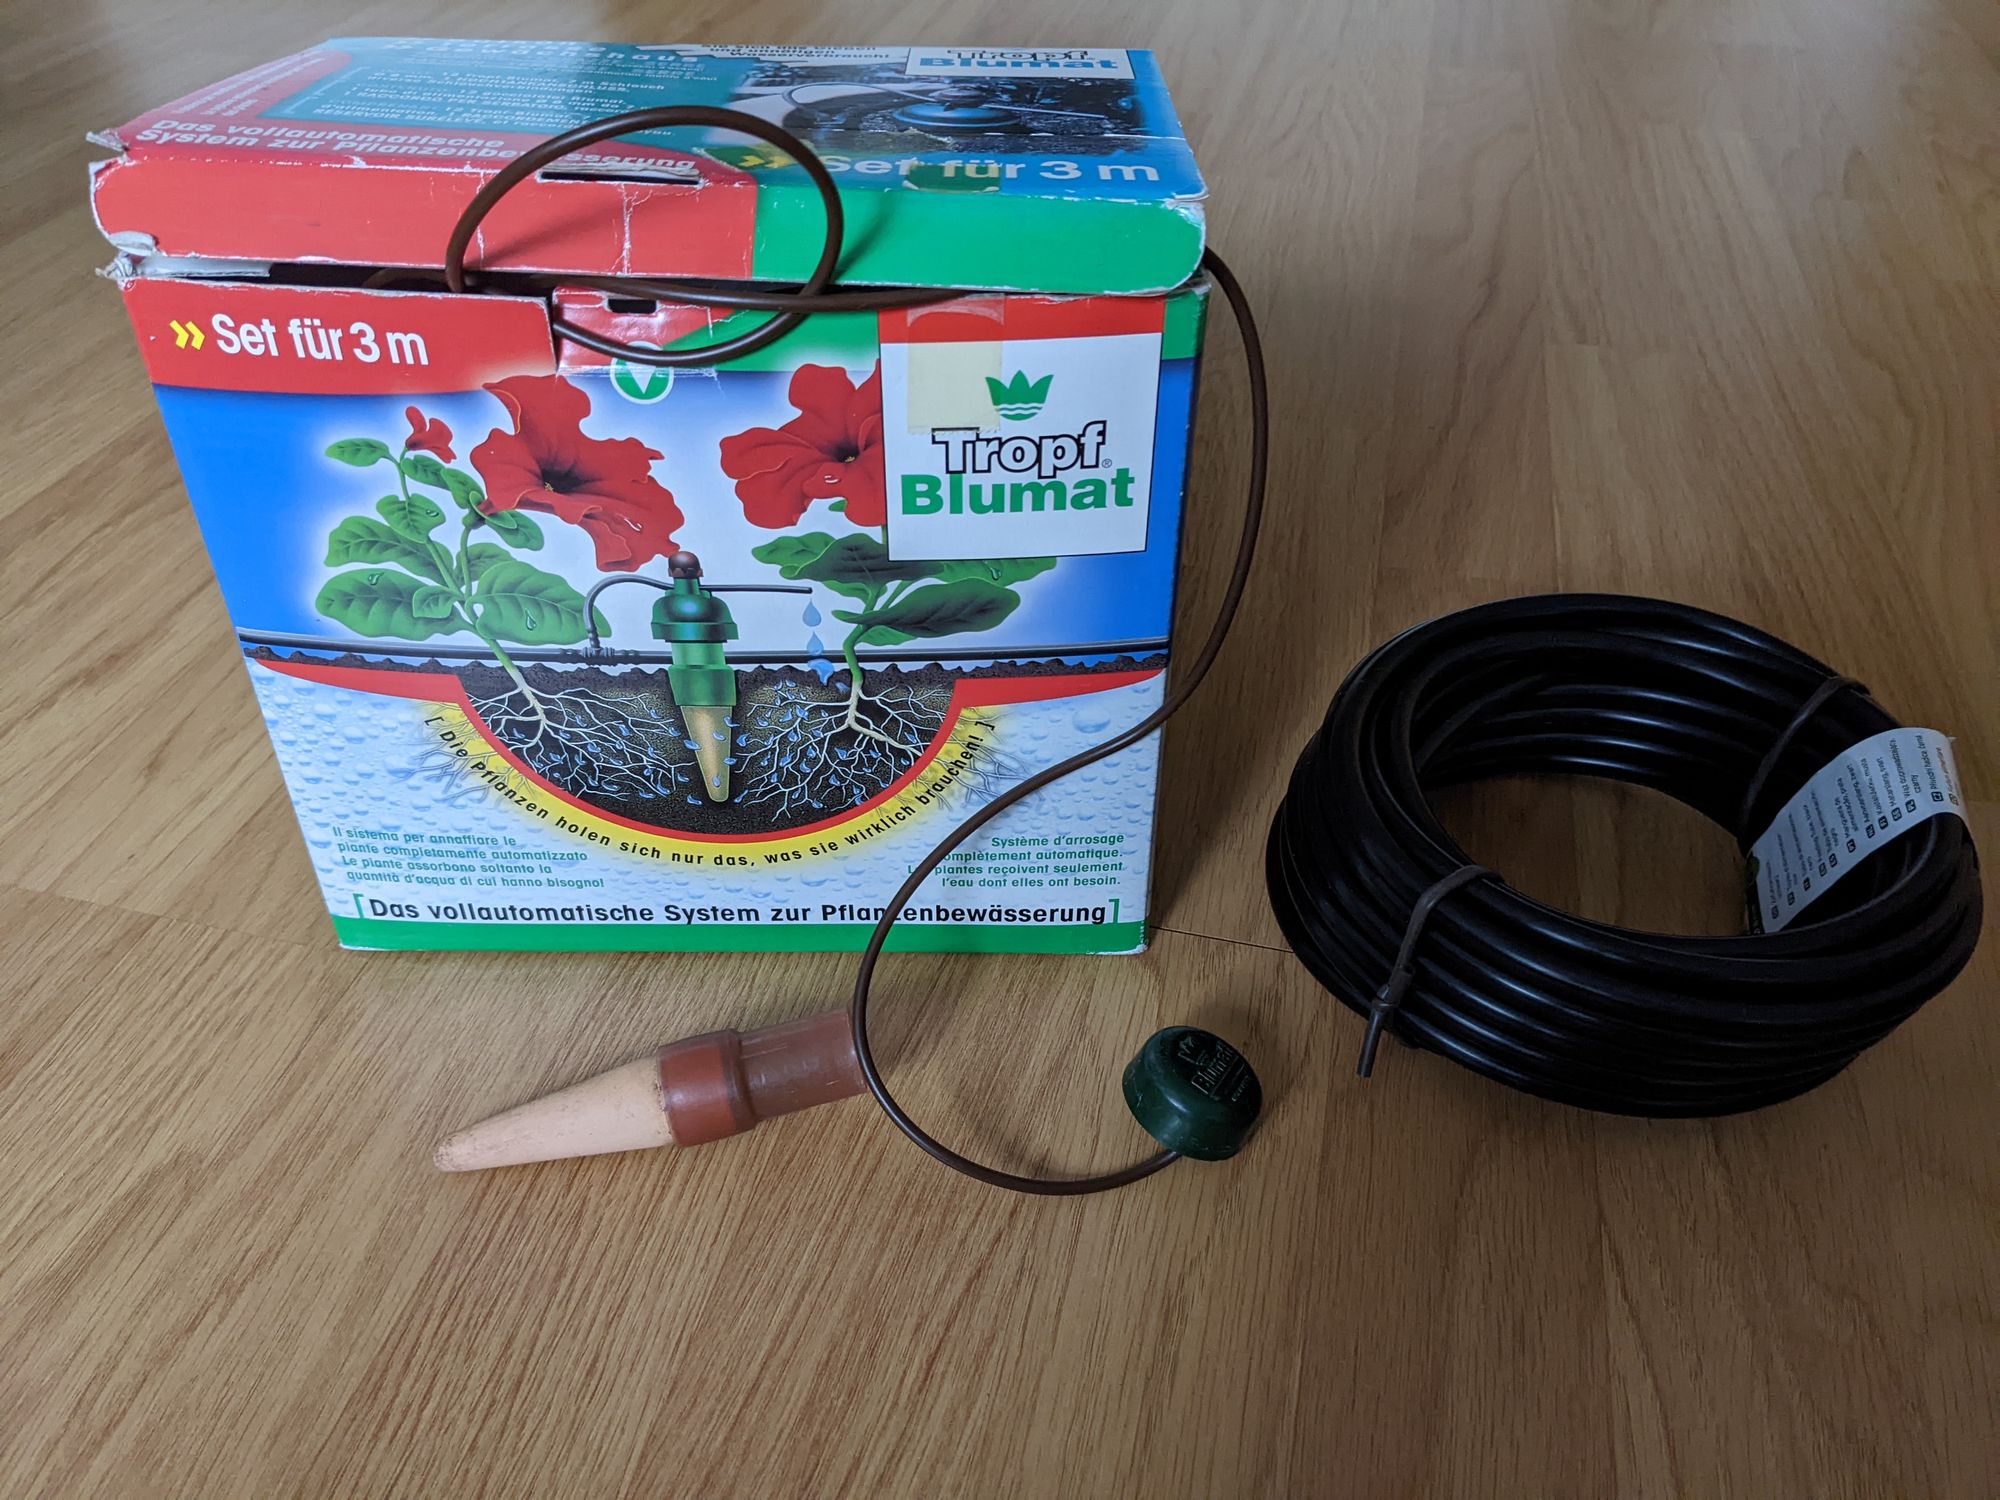 Package of the Blumat Tropf System, Clay cones and water tube